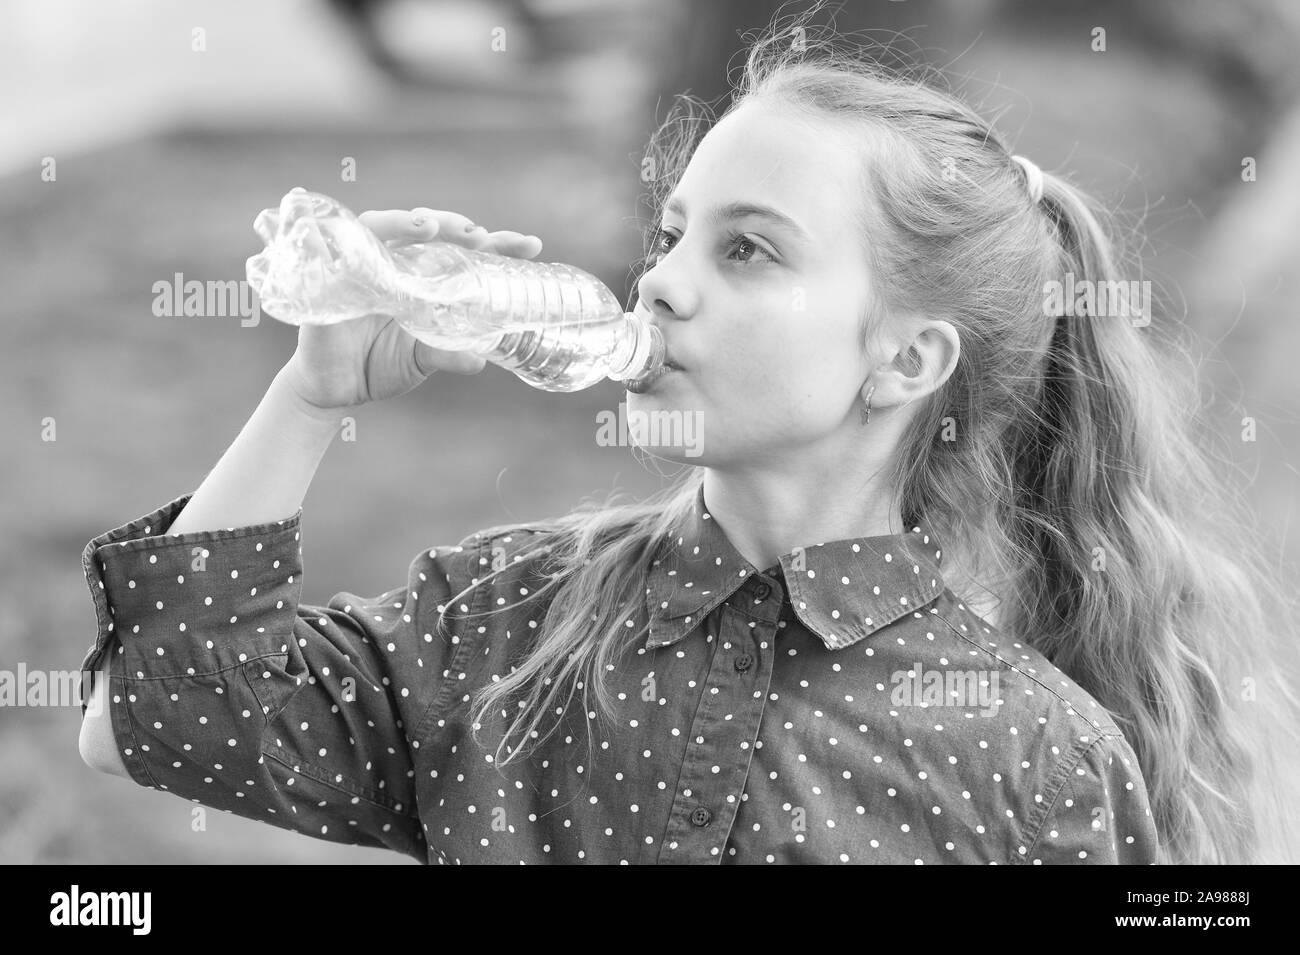 Clean water is a vital resource for human existence. Little girl having a drop of water. Thirsty child drinking fresh water from plastic bottle. Quenching thirst with natural mineral or potable water. Stock Photo